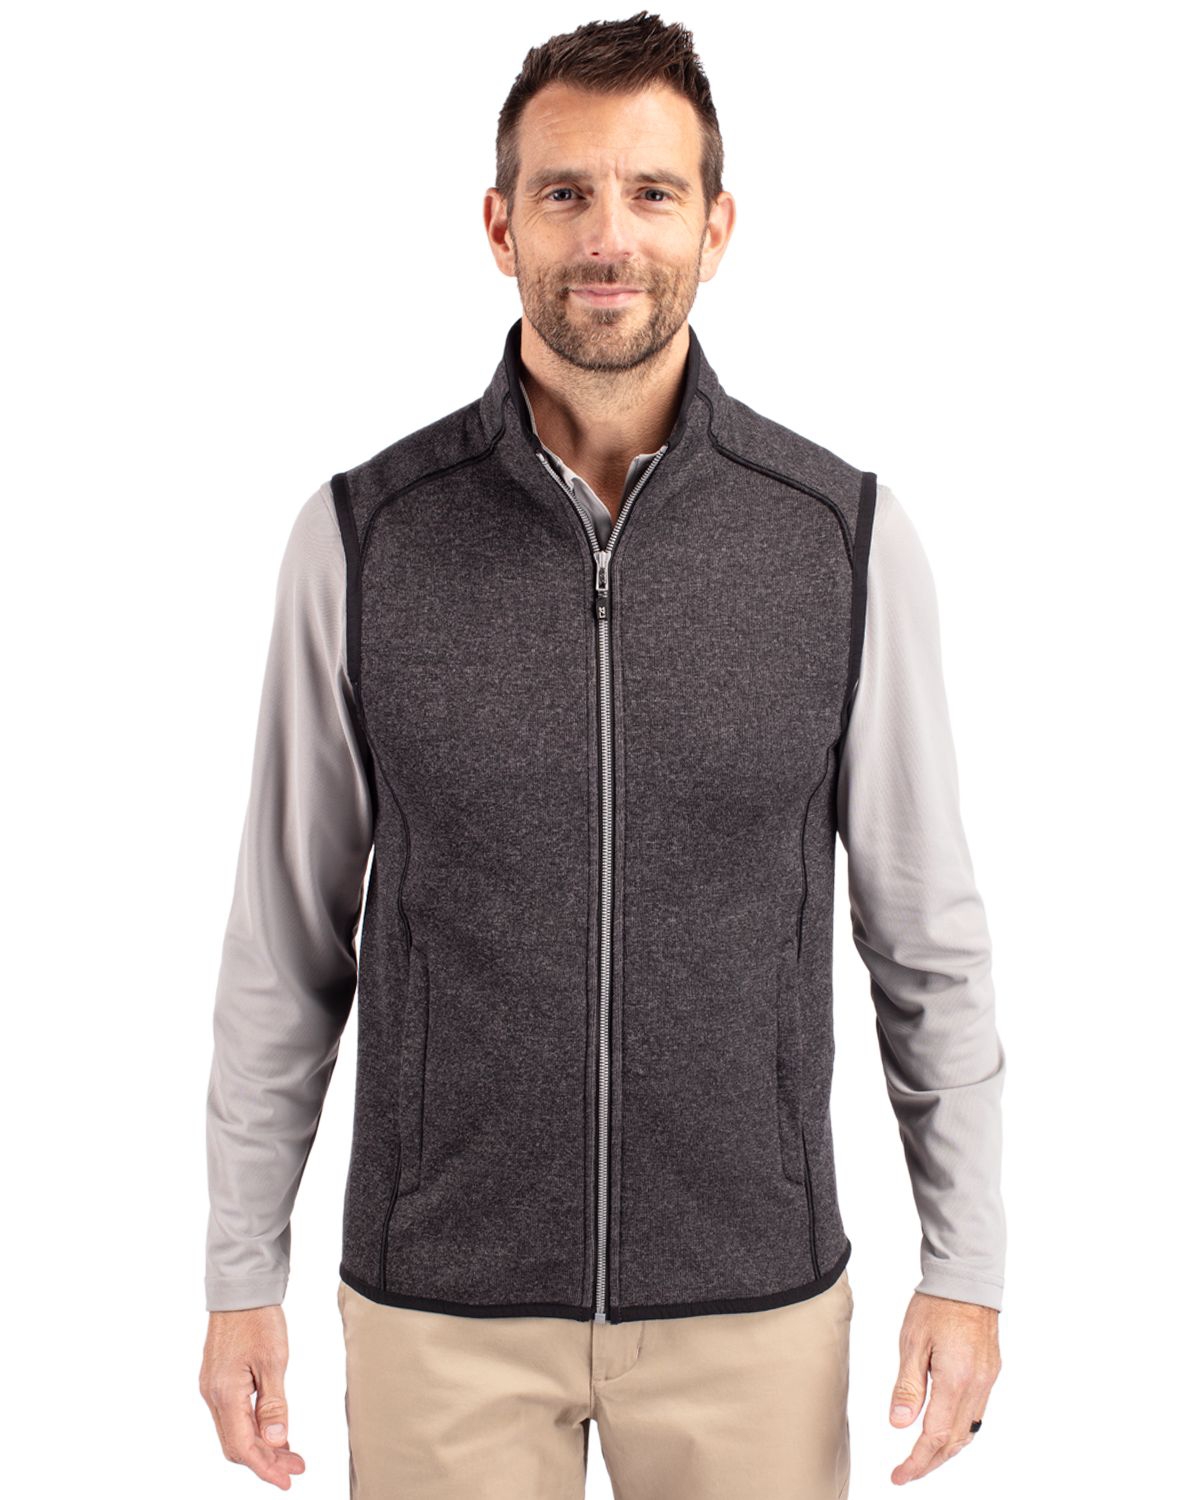 Mainsail Sweater-Knit Mens Big and Tall Full Zip Vest - Charcoal heather